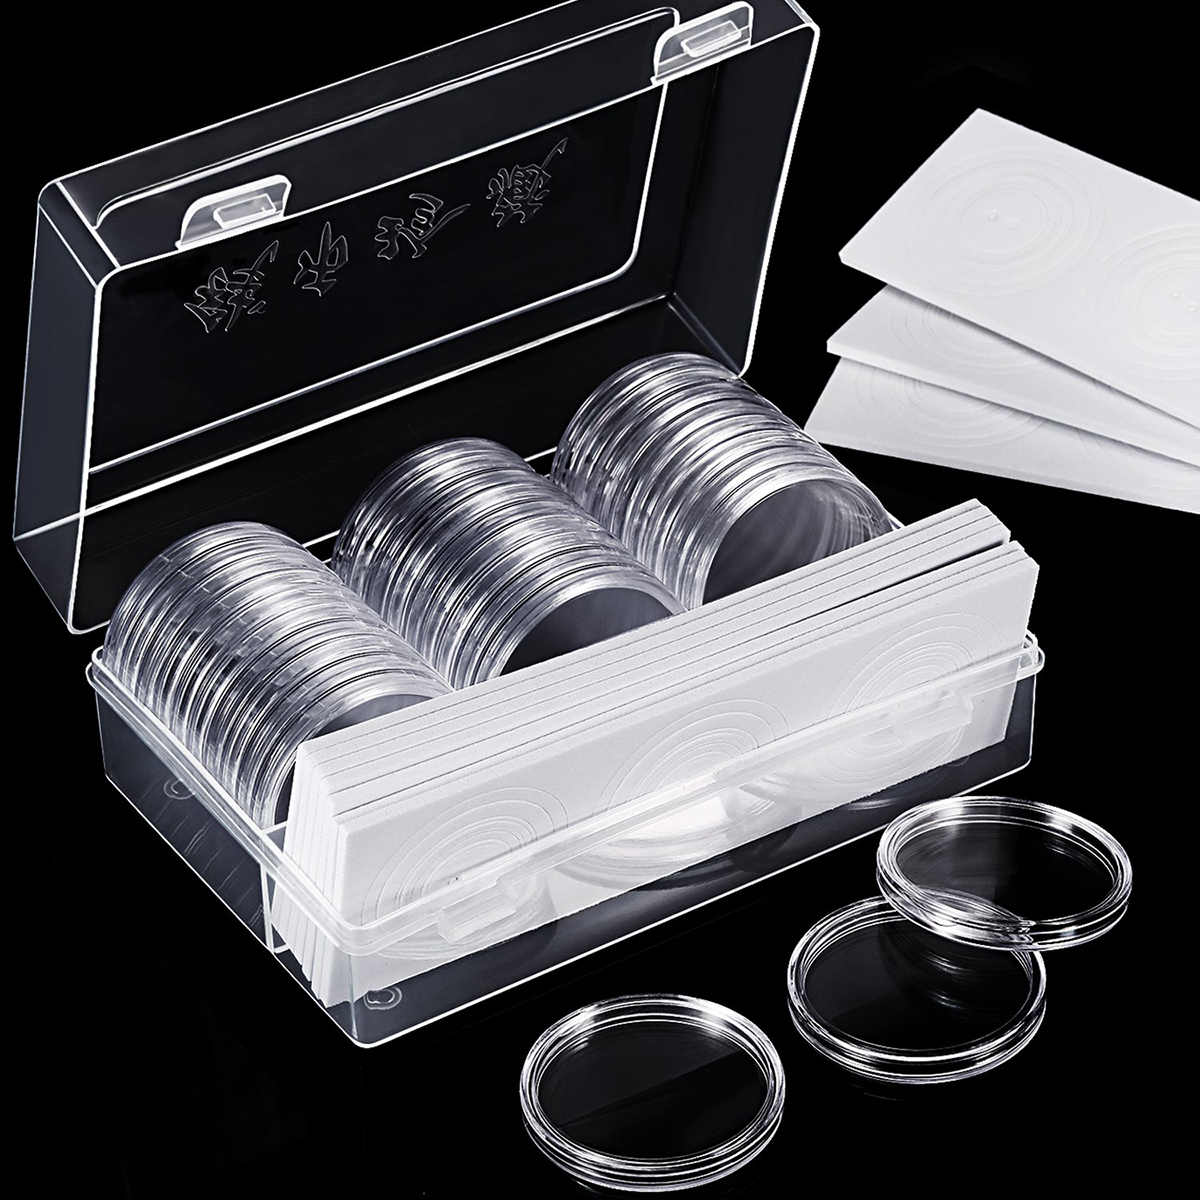 

30Pcs/Lot 25mm/27mm/30mm/40mm Clear Plastic Coin Holder Capsules Cases Round Storage Ring Boxes